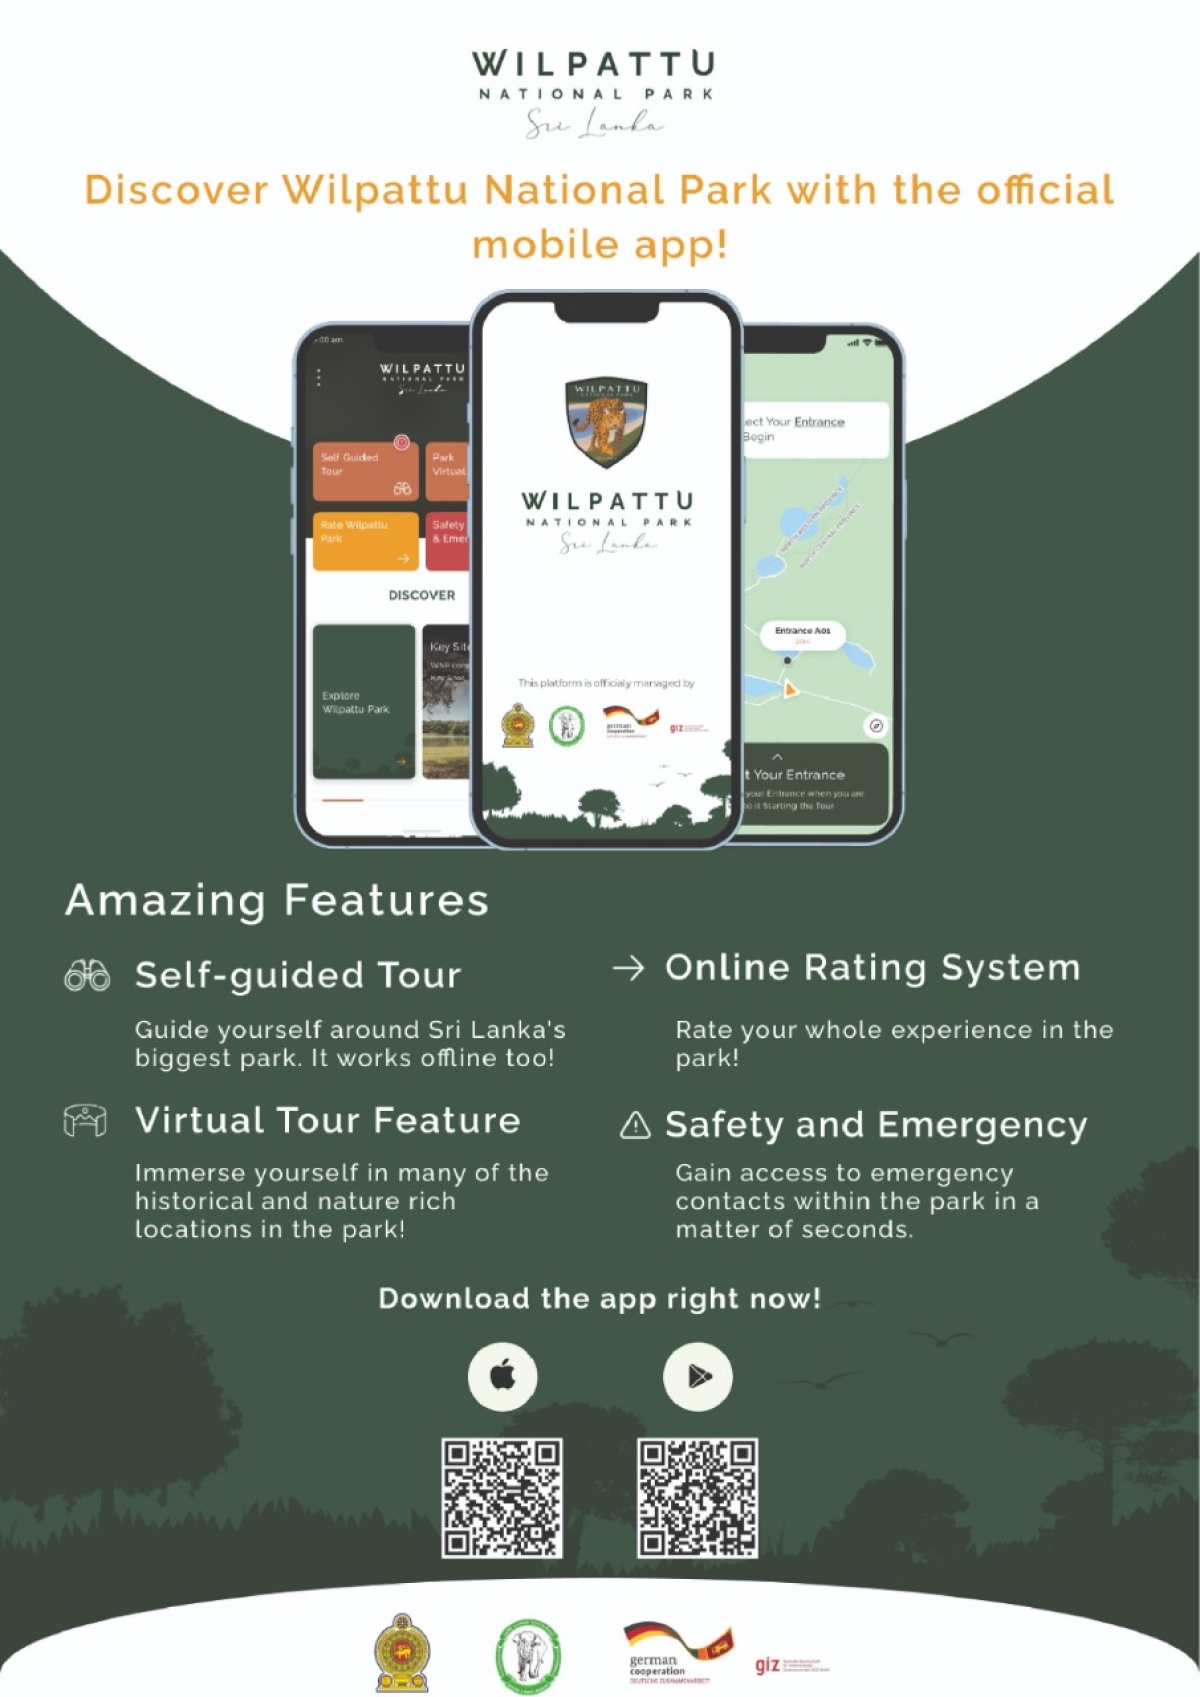 Wilpattu becomes first national park to get its own mobile app